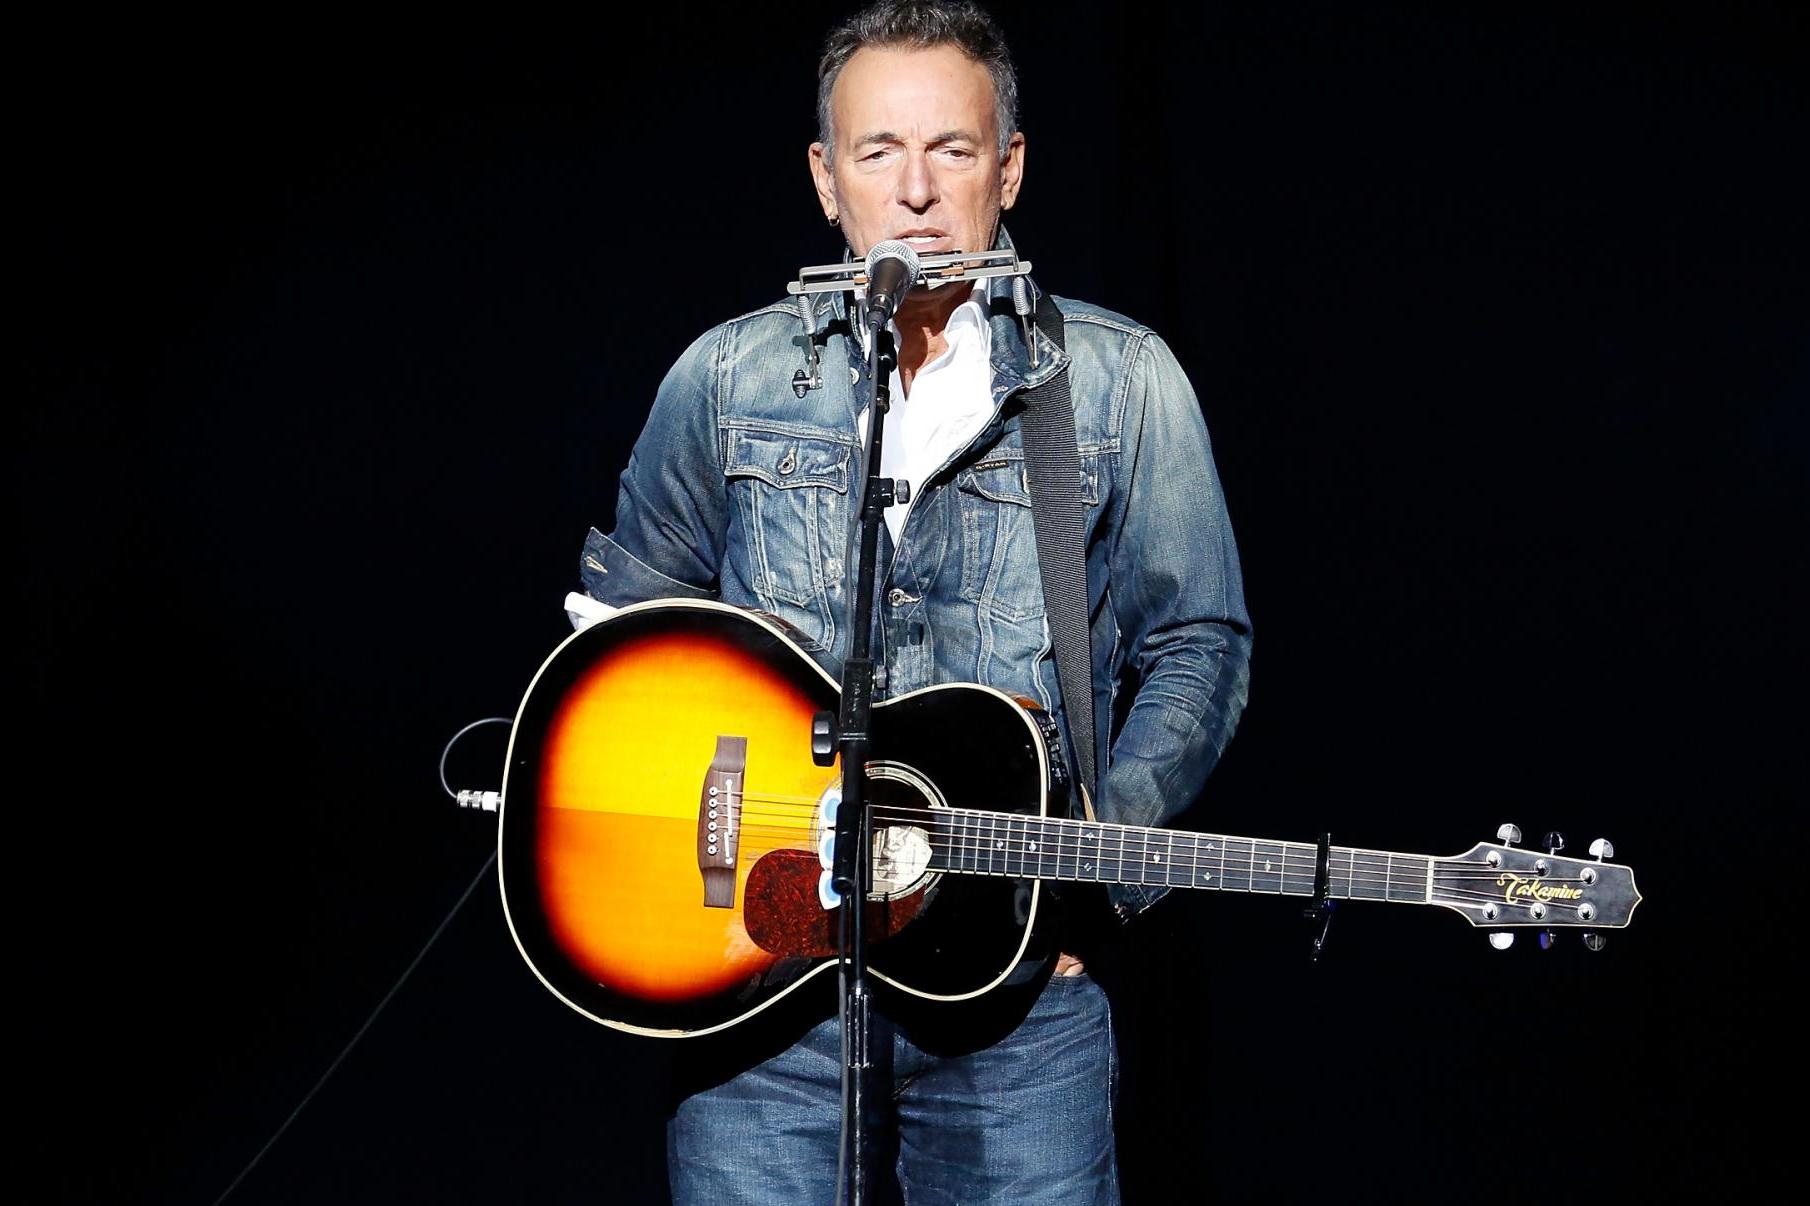 Bruce Springsteen performs on stage at The Hulu Theater at Madison Square Garden on 5 November, 2018 in New York City.